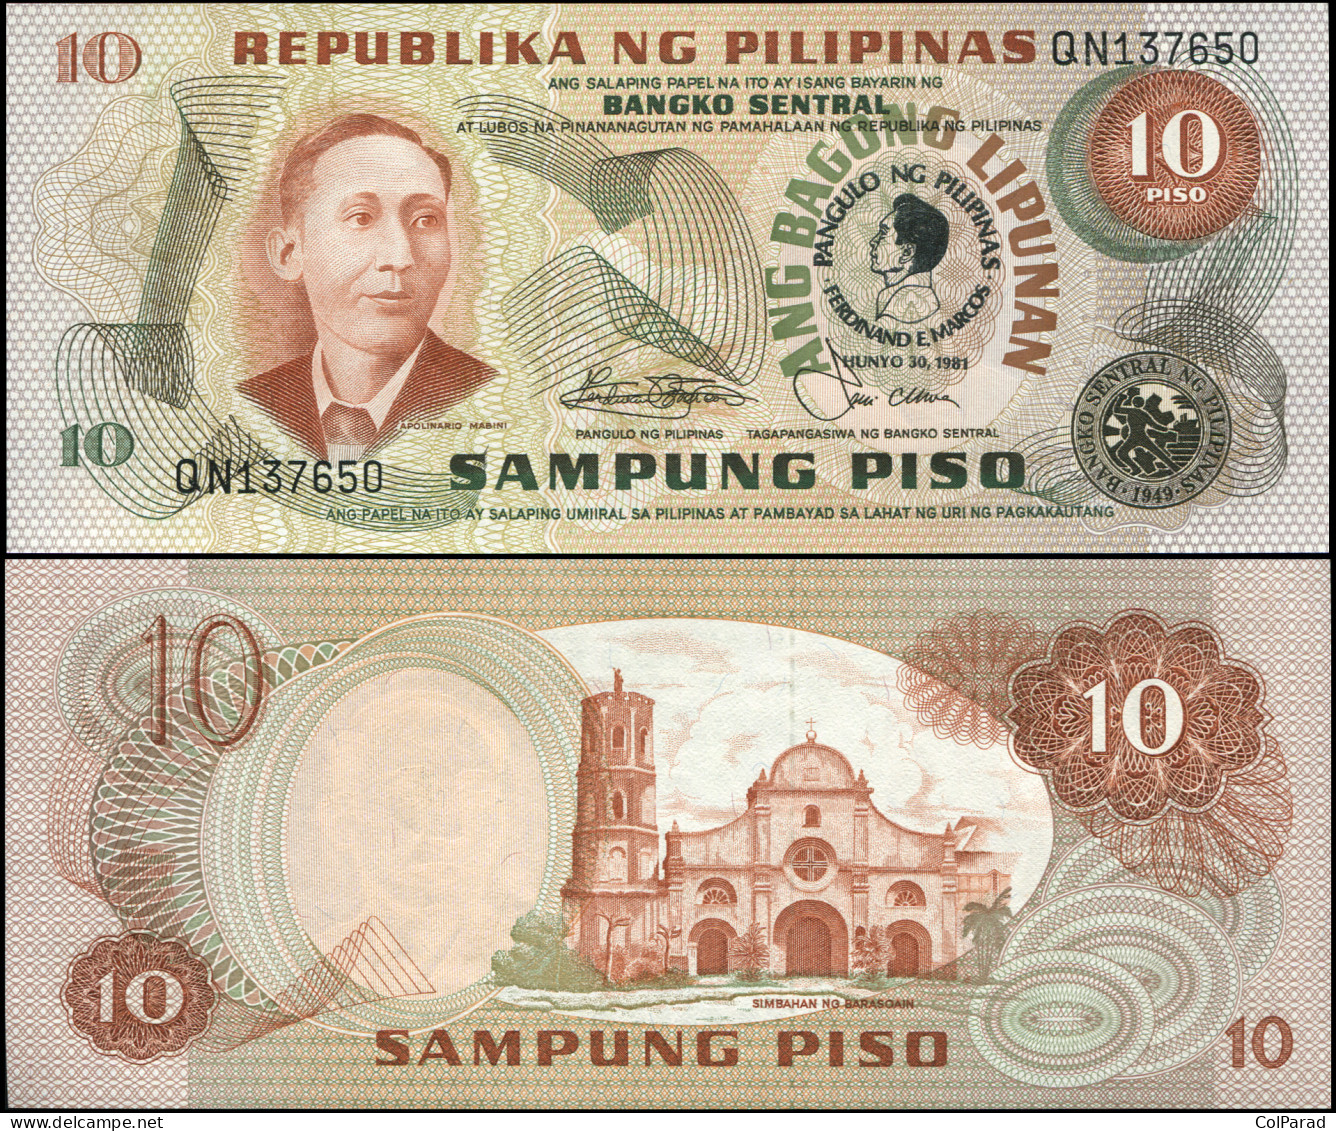 PHILIPPINES 10 PISO - 1981 - Paper Unc - P.167a Banknote - Ferdinand Marcos - Philippines